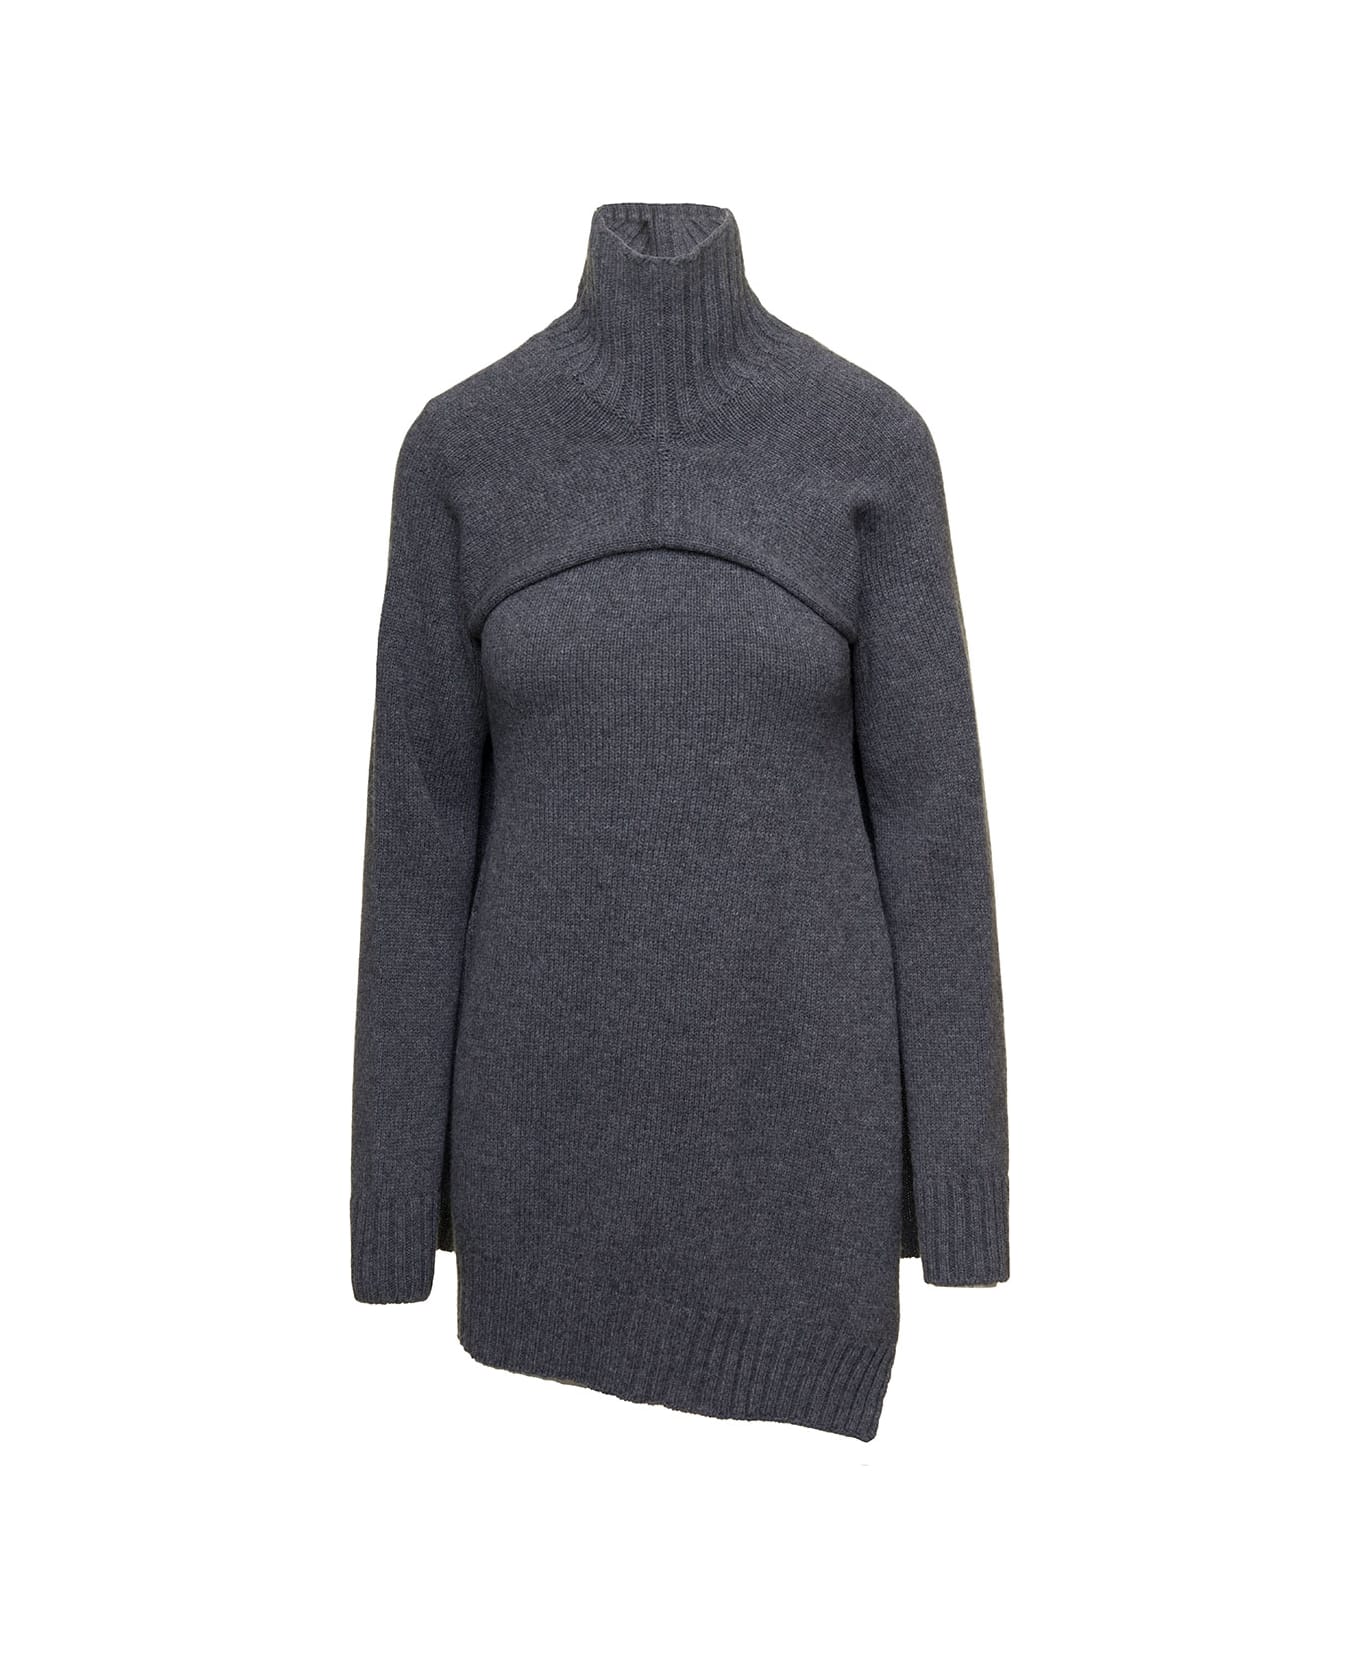 Jil Sander Grey Two-piece Sweater With High-neck In Wool Woman - Grey ニットウェア